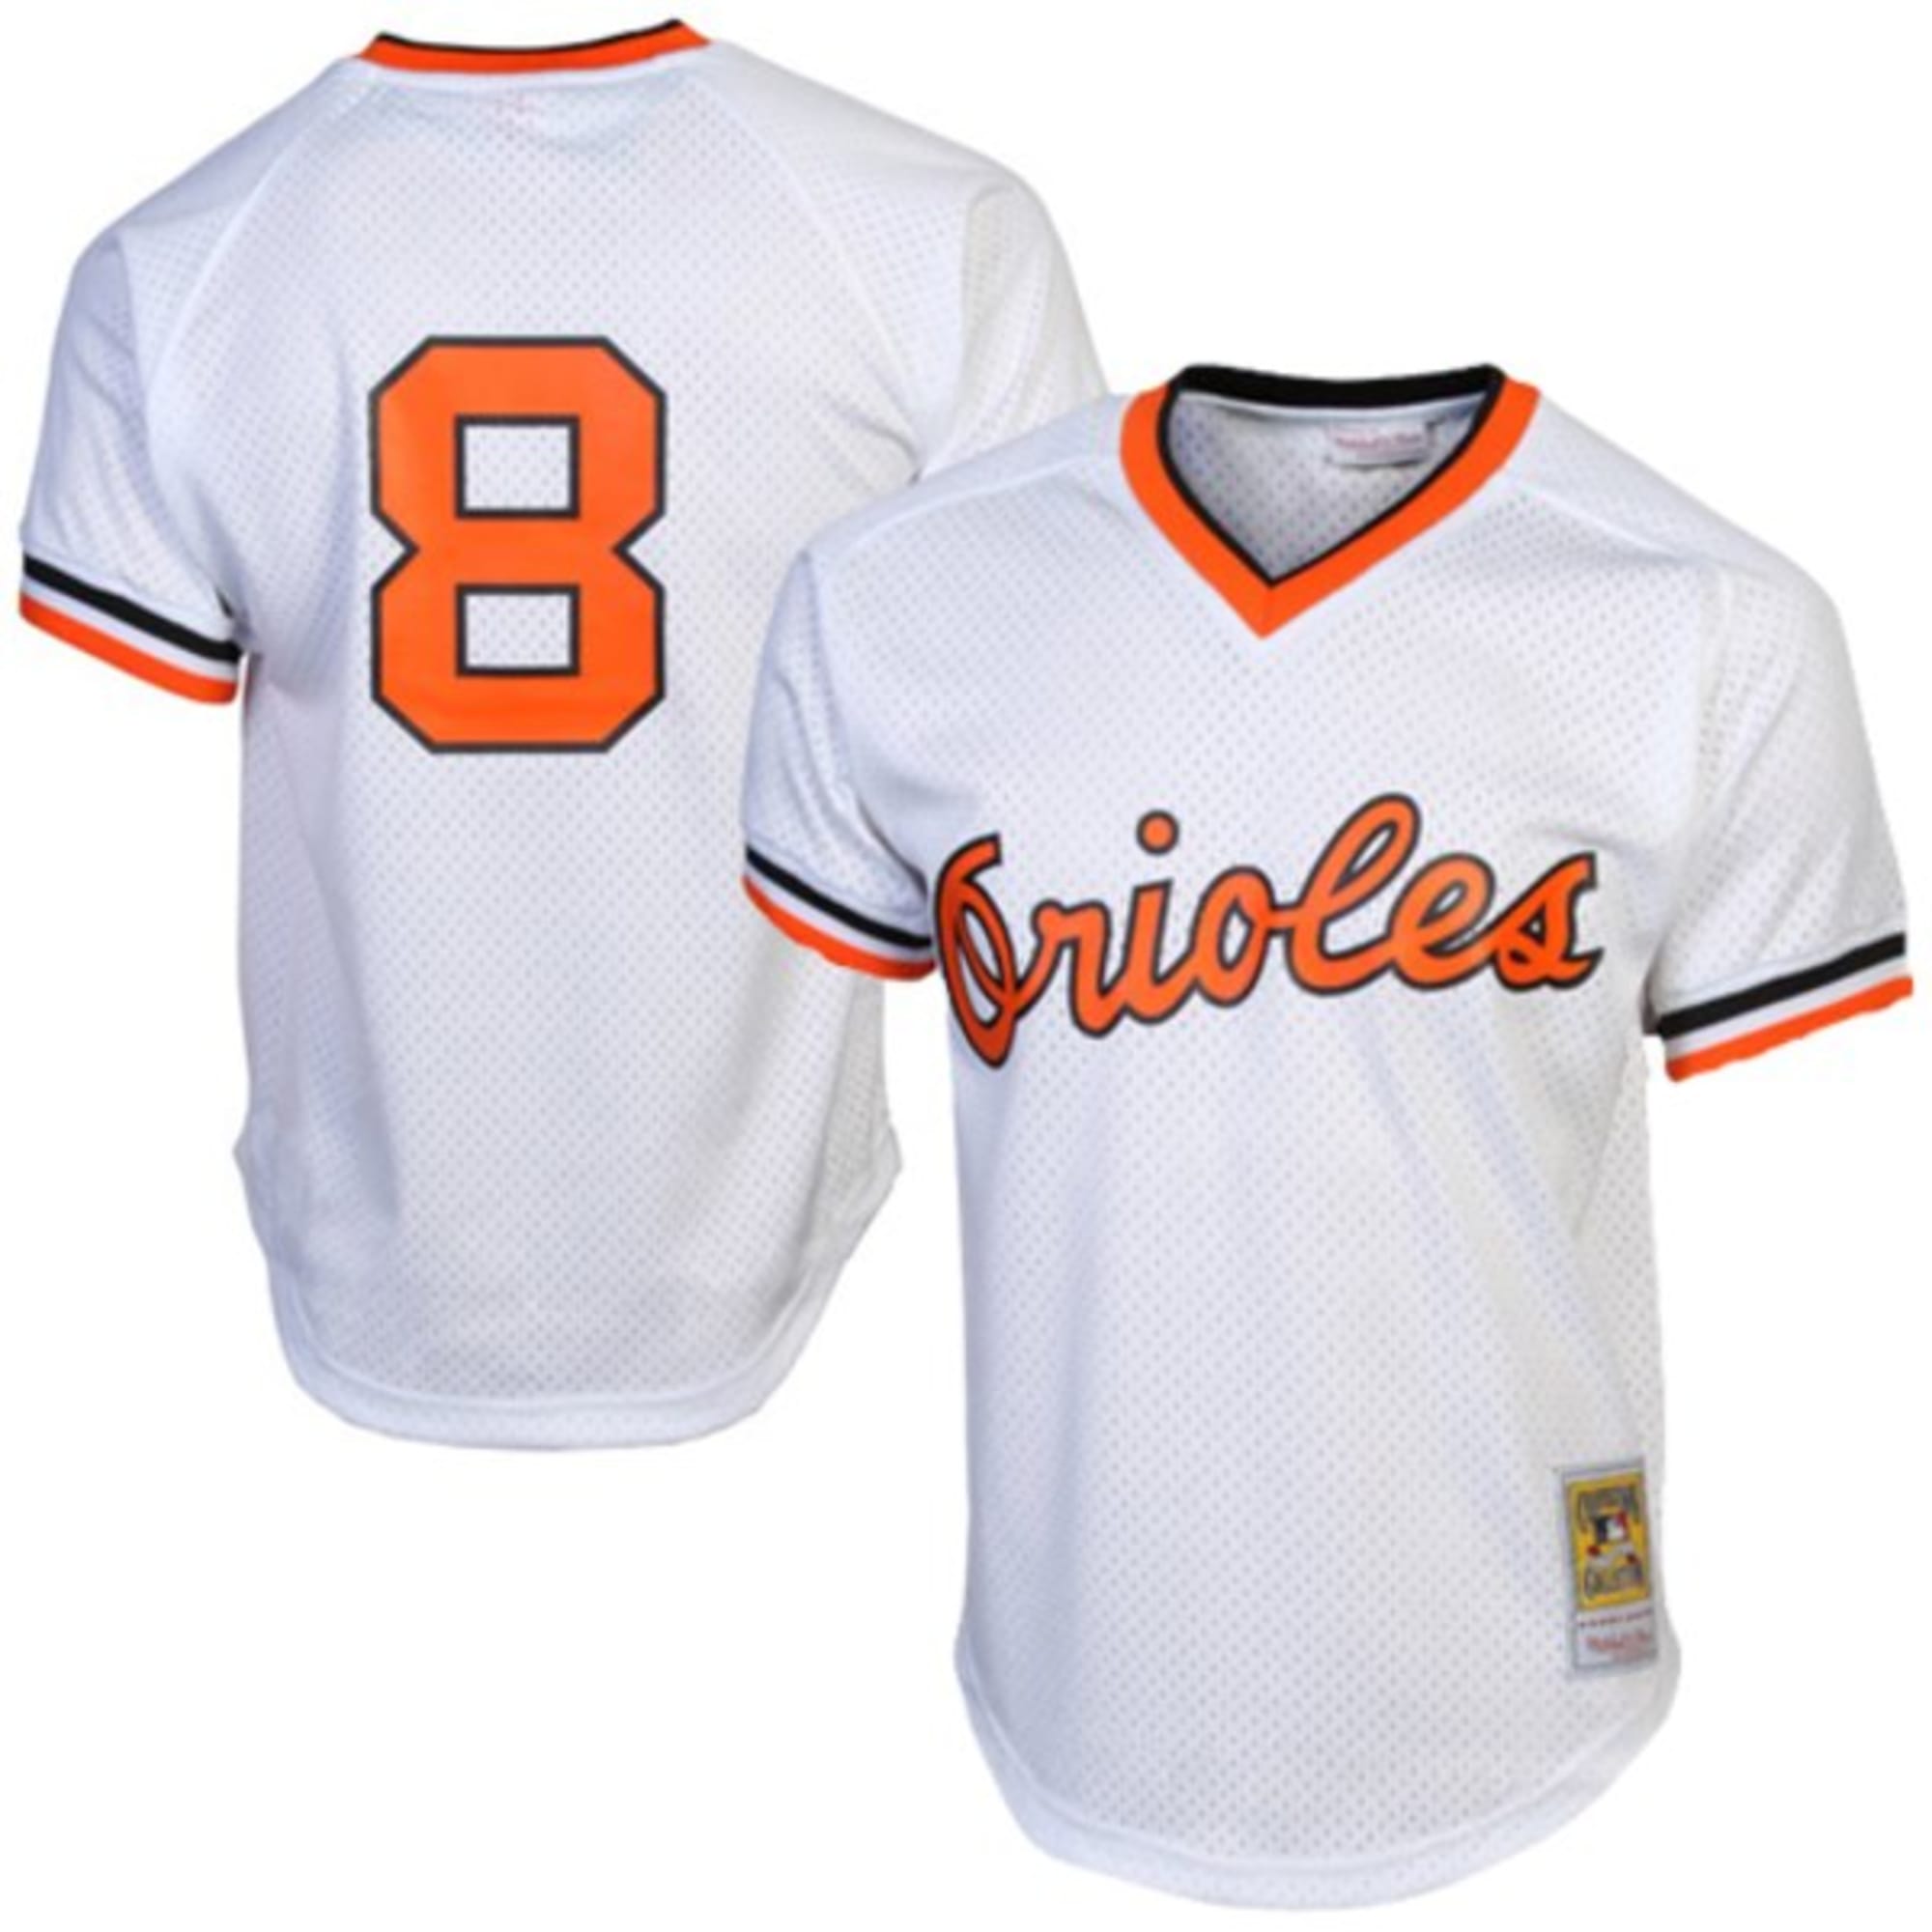 orioles warm up jersey